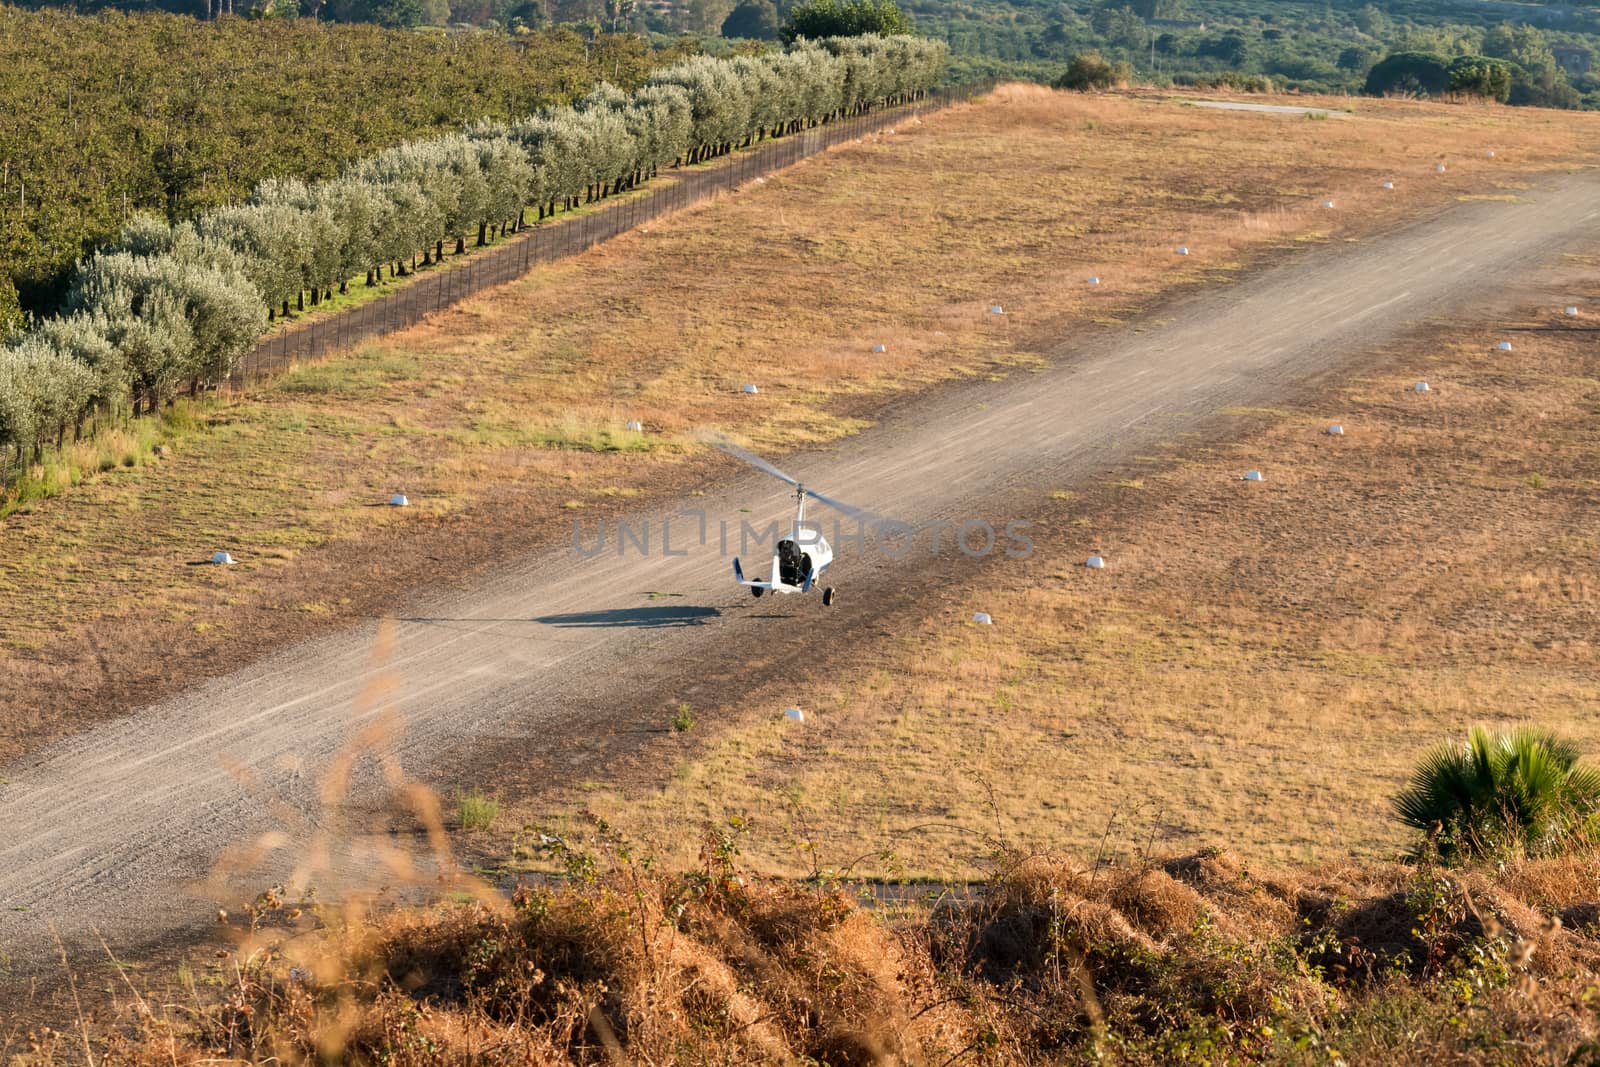 Gyrocopter single pilot prepares to land on the small track